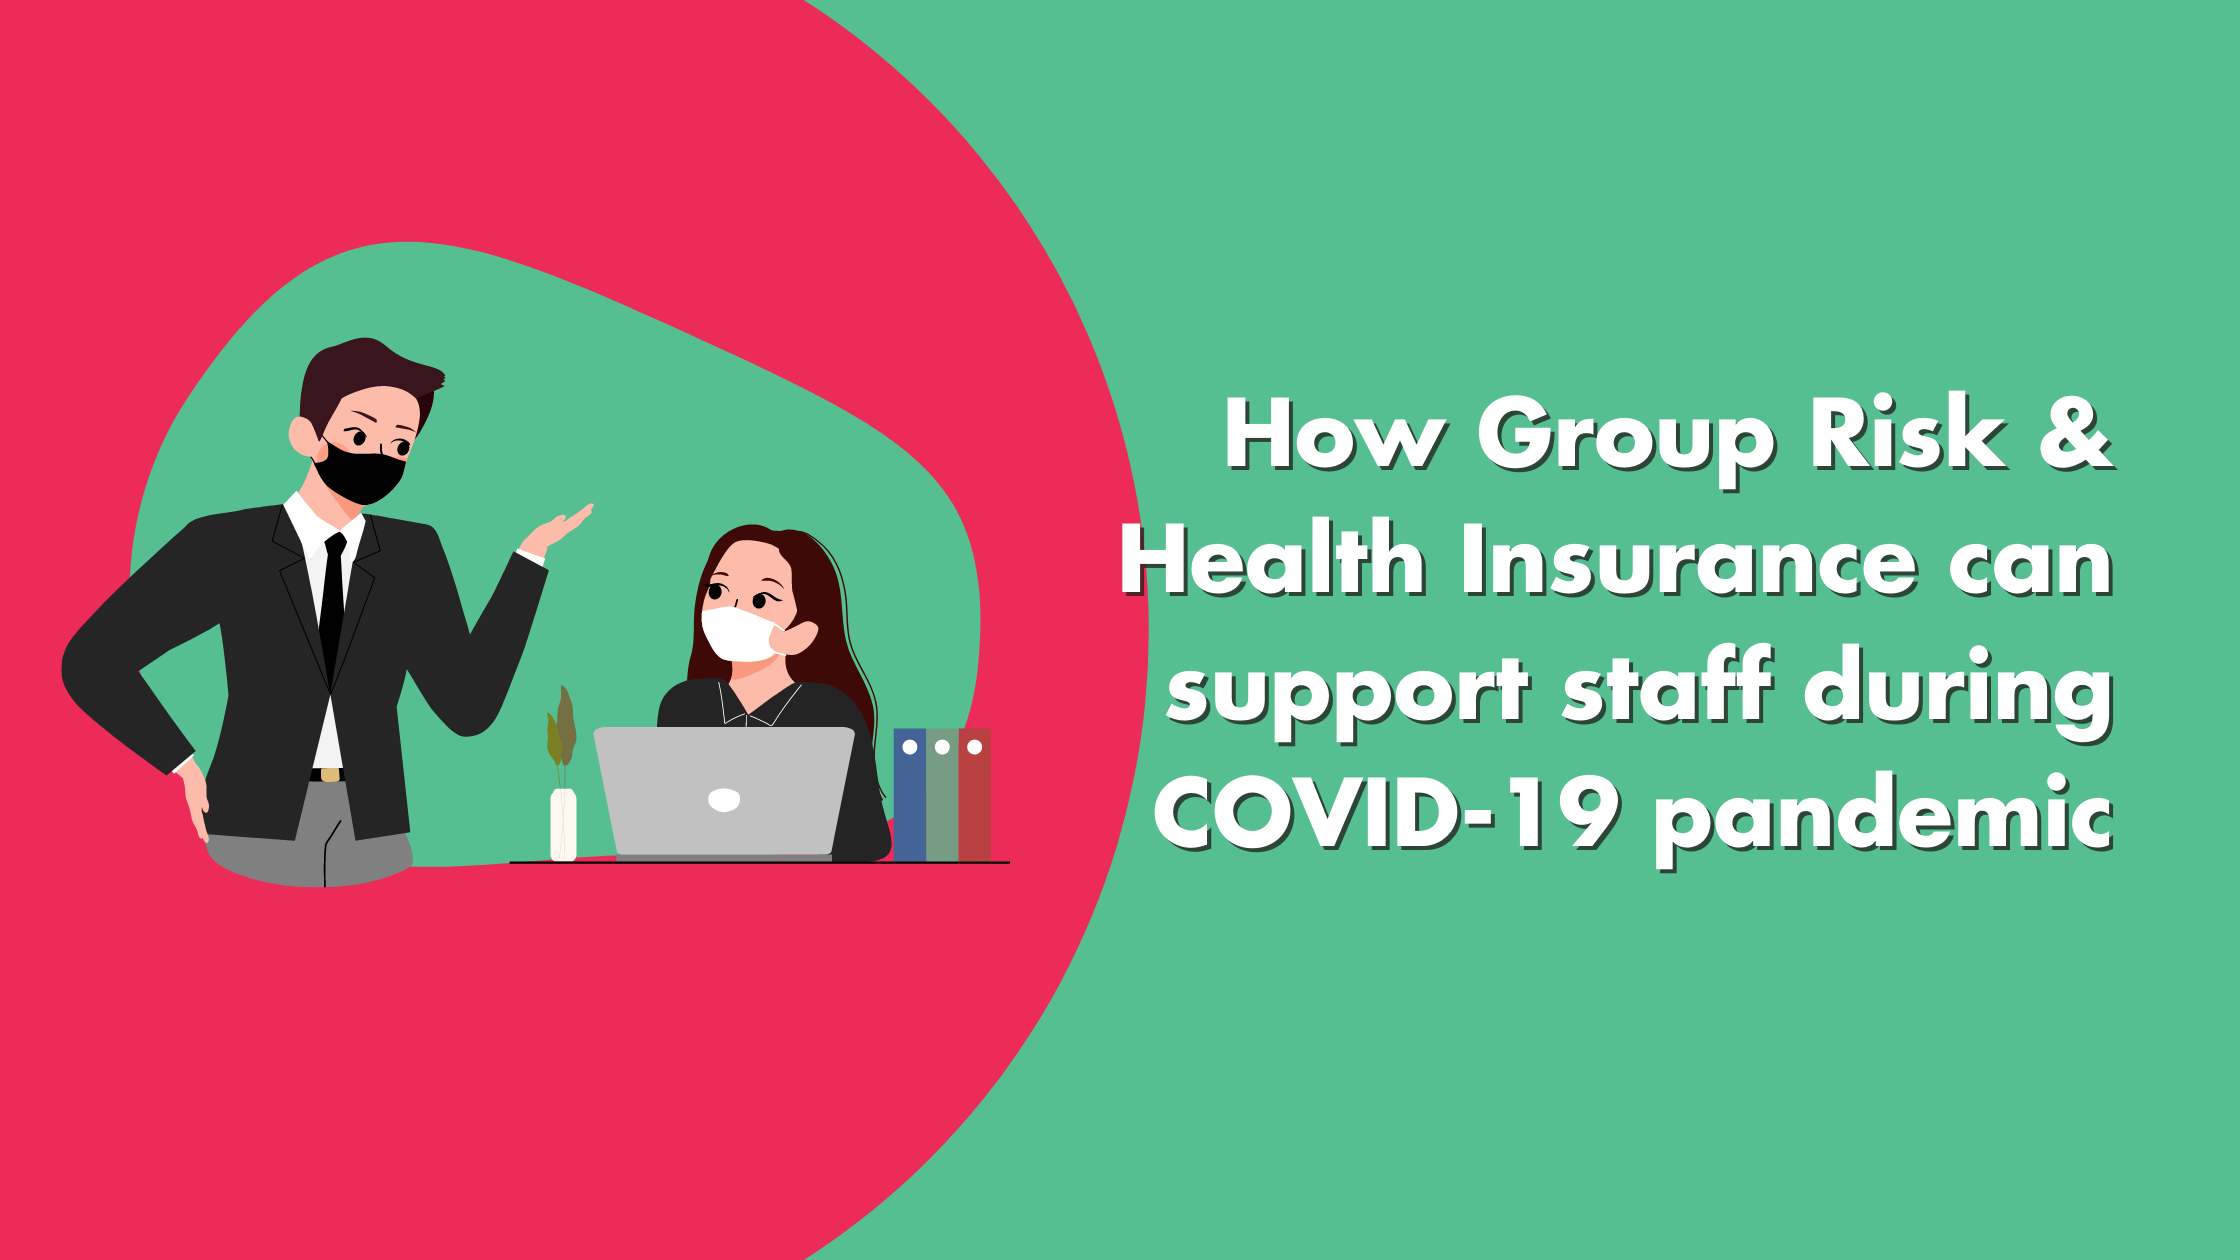 How Group Risk & Health Insurance Can Support Staff During COVID-19 Pandemic